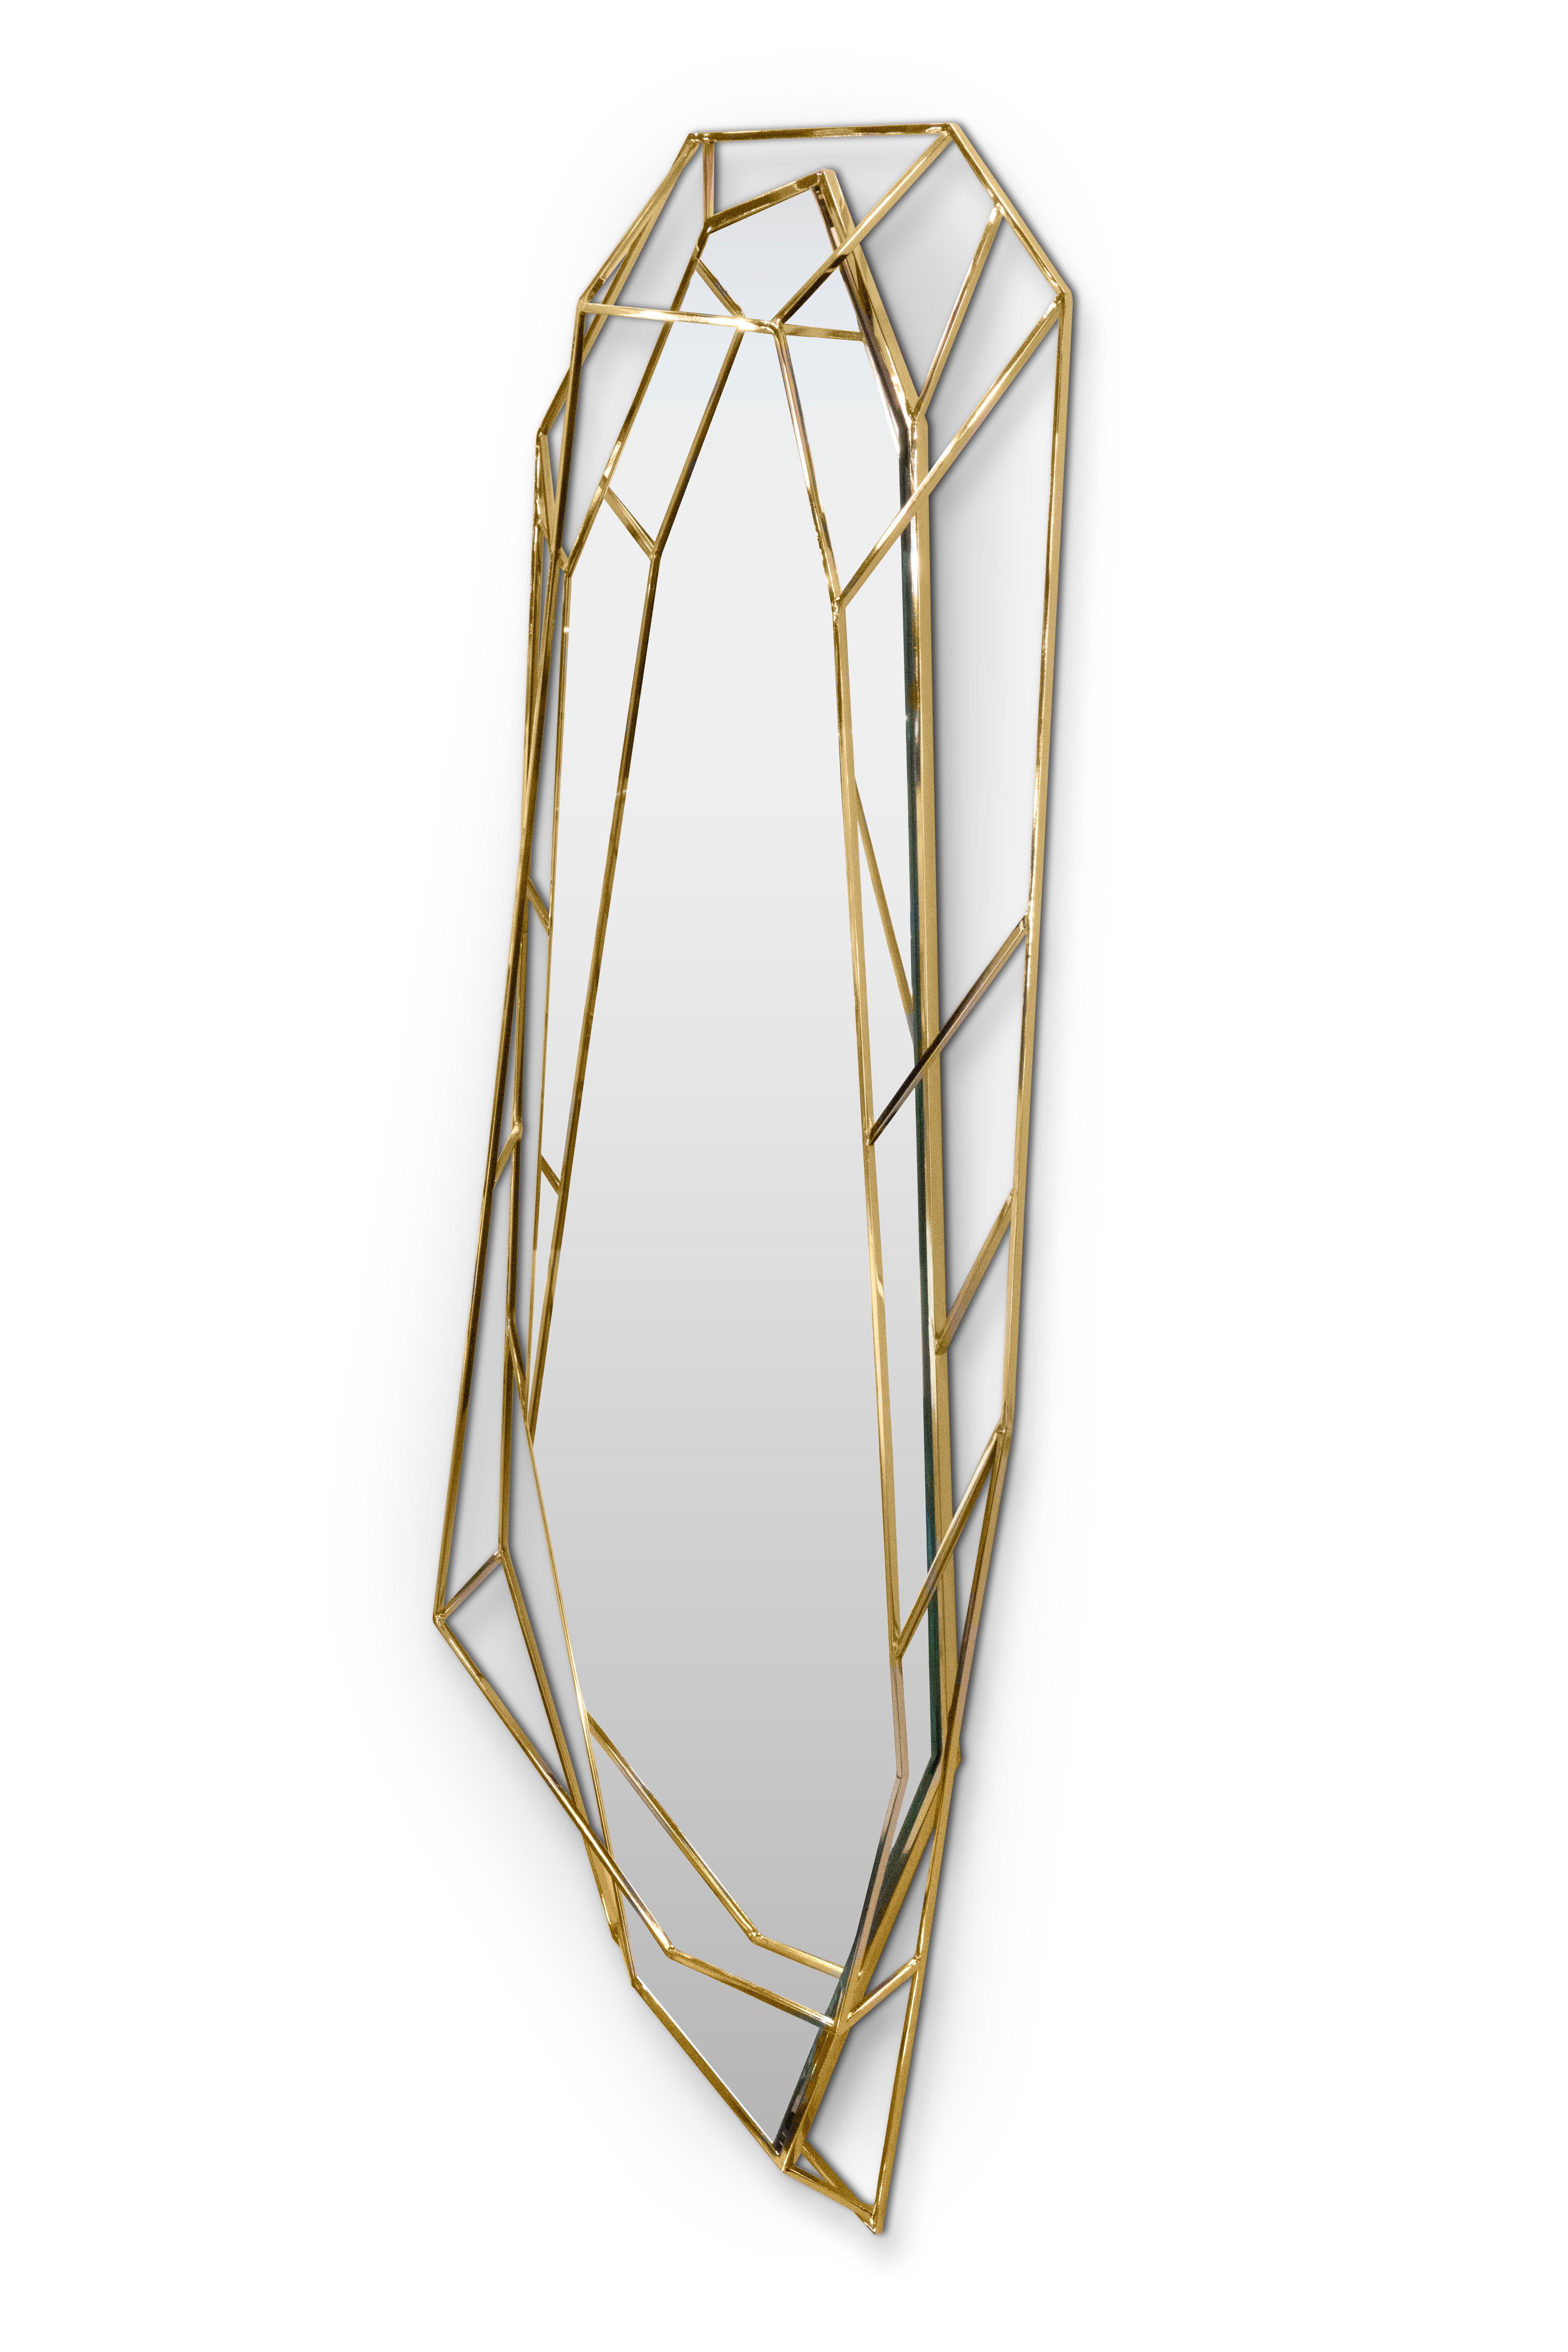 Inspired by asymmetrical and dazzling shapes of a Diamond rock, this mirror is the ultimate combination of geometry and design. The use of gold enhances the luxurious element within this object resulting in a sophisticated yet, dynamic piece that